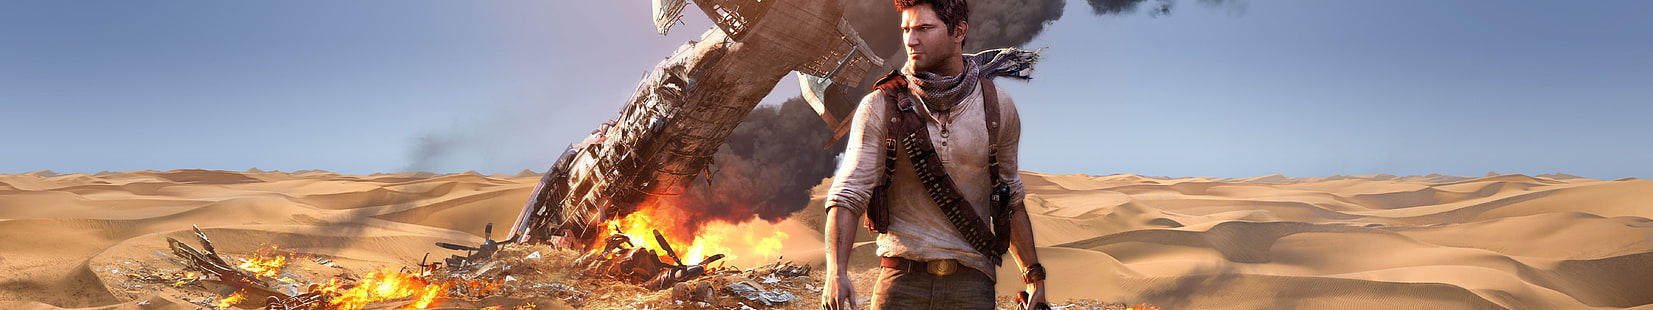 7680x1440 px uncharted Uncharted 3: Drakes
Deception Entertainment Funny HD Art , Uncharted, 7680x1440 px, Uncharted 3: Drakes
De, HD wallpaper HD wallpaper